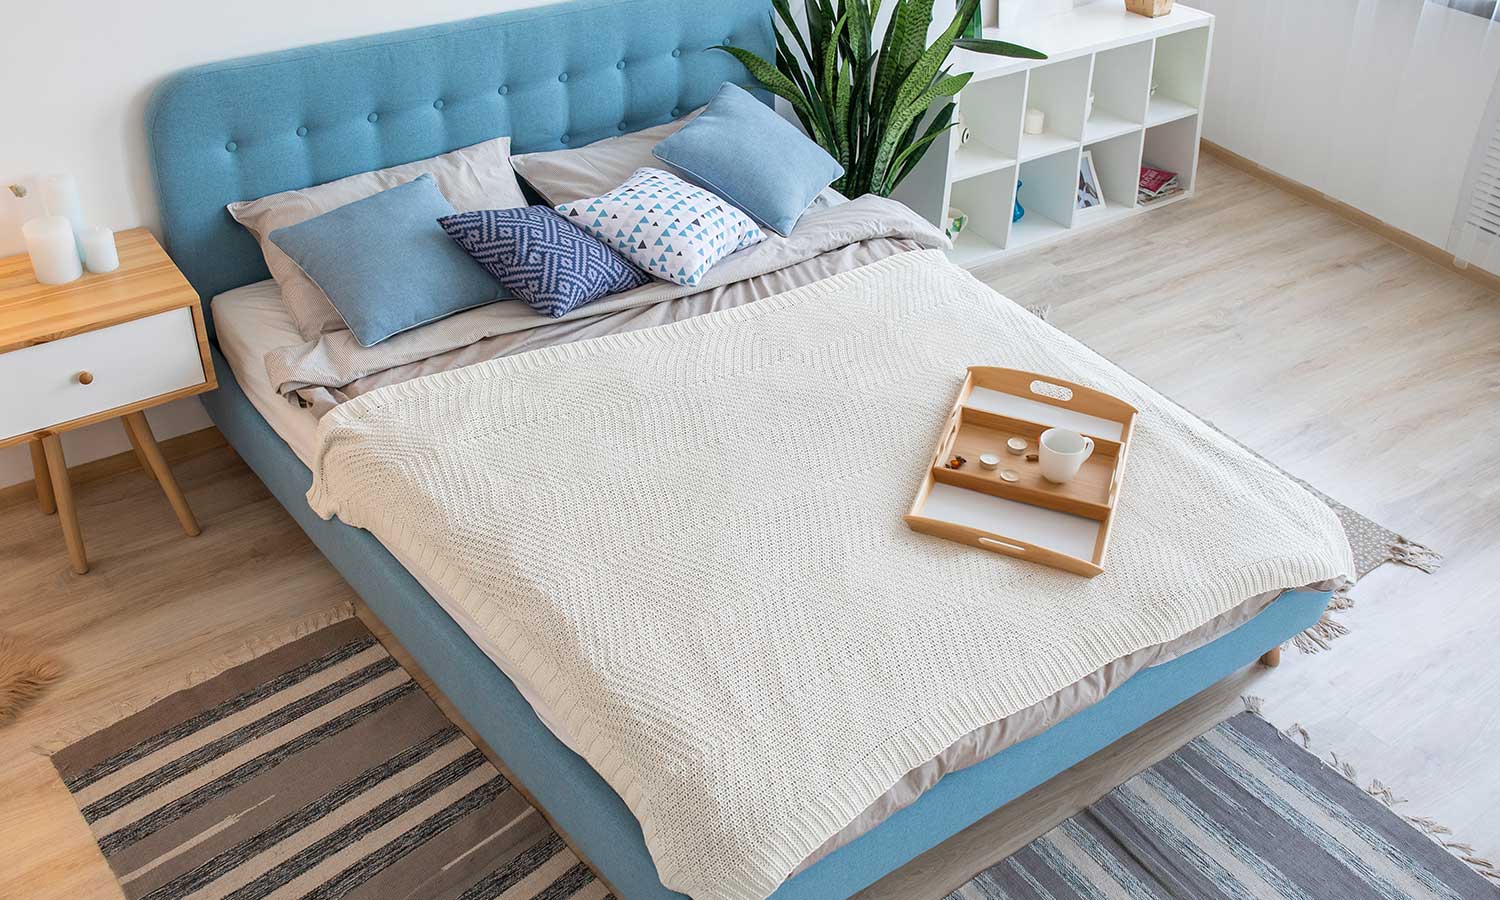 What Are The Main Types Of Beds? The 3 Most Popular Options